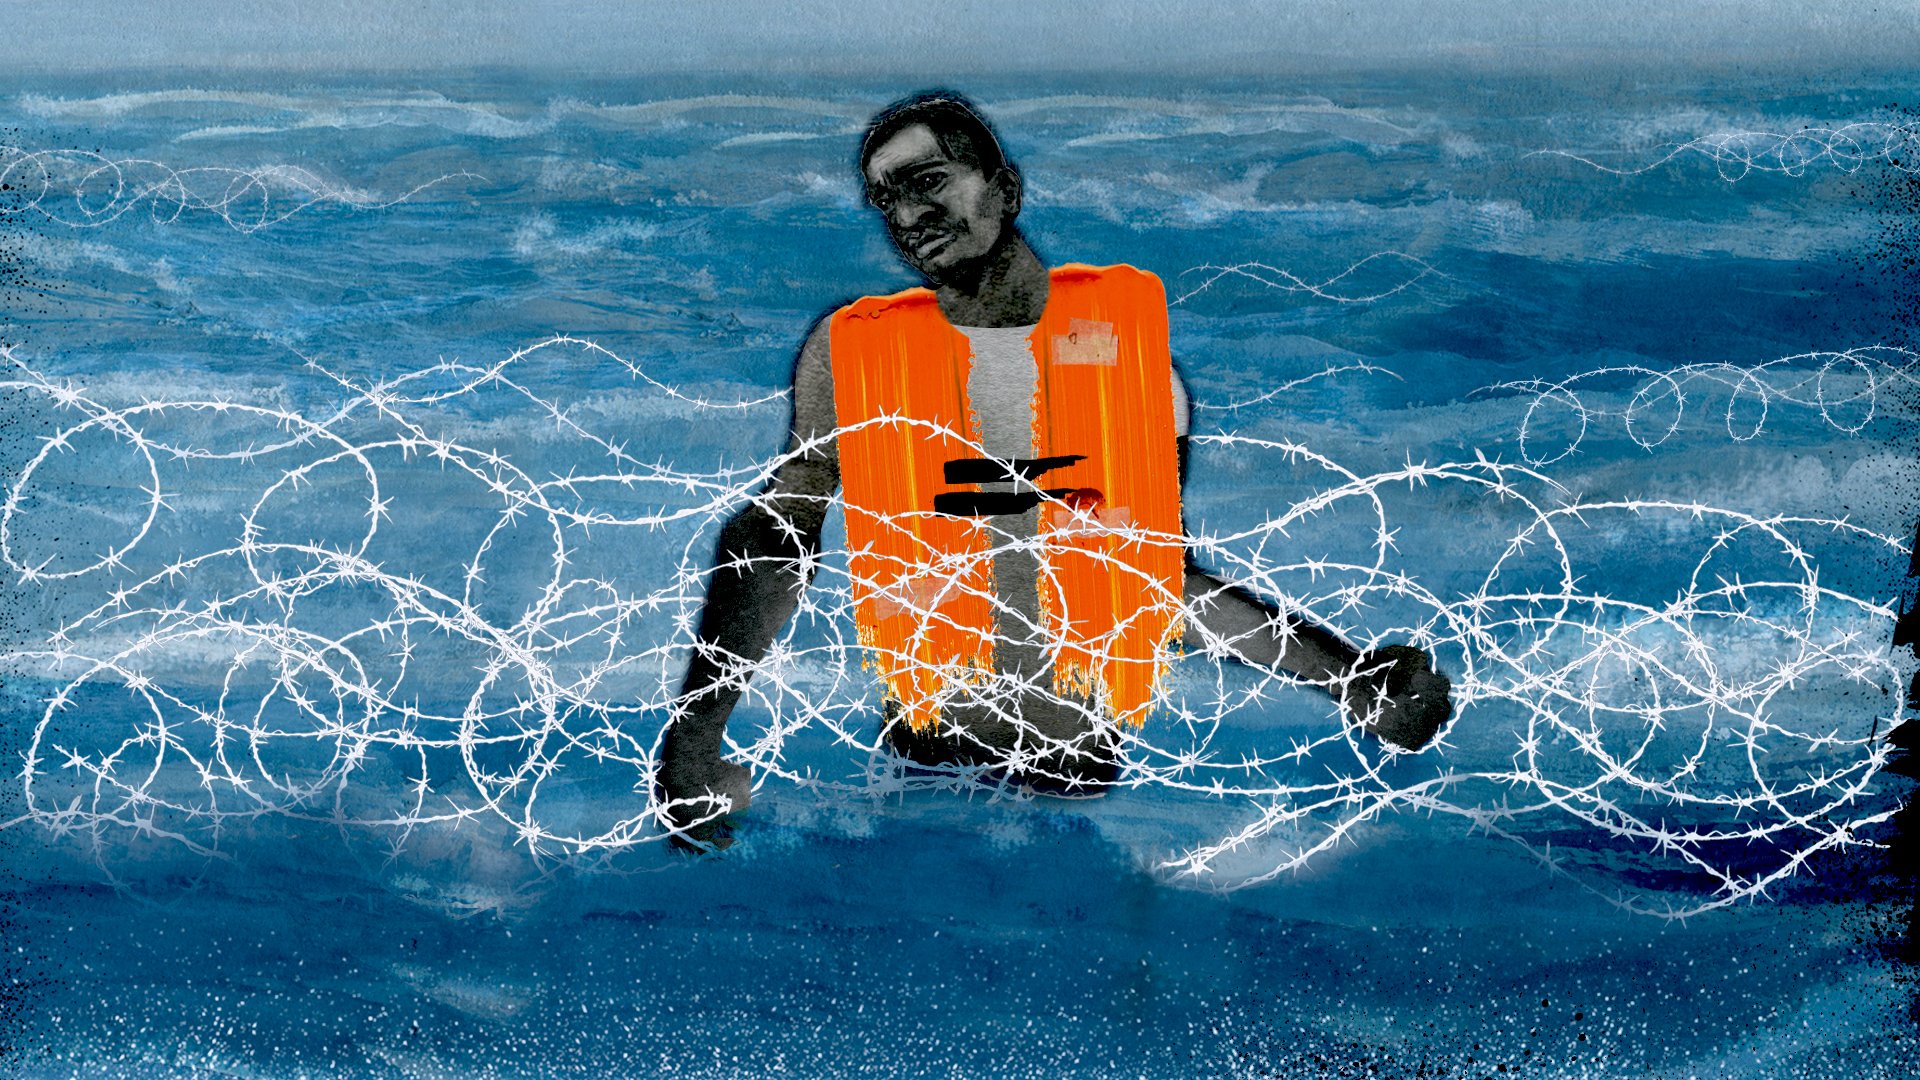 How an EU-funded agency is working to keep migrants from reaching Europe